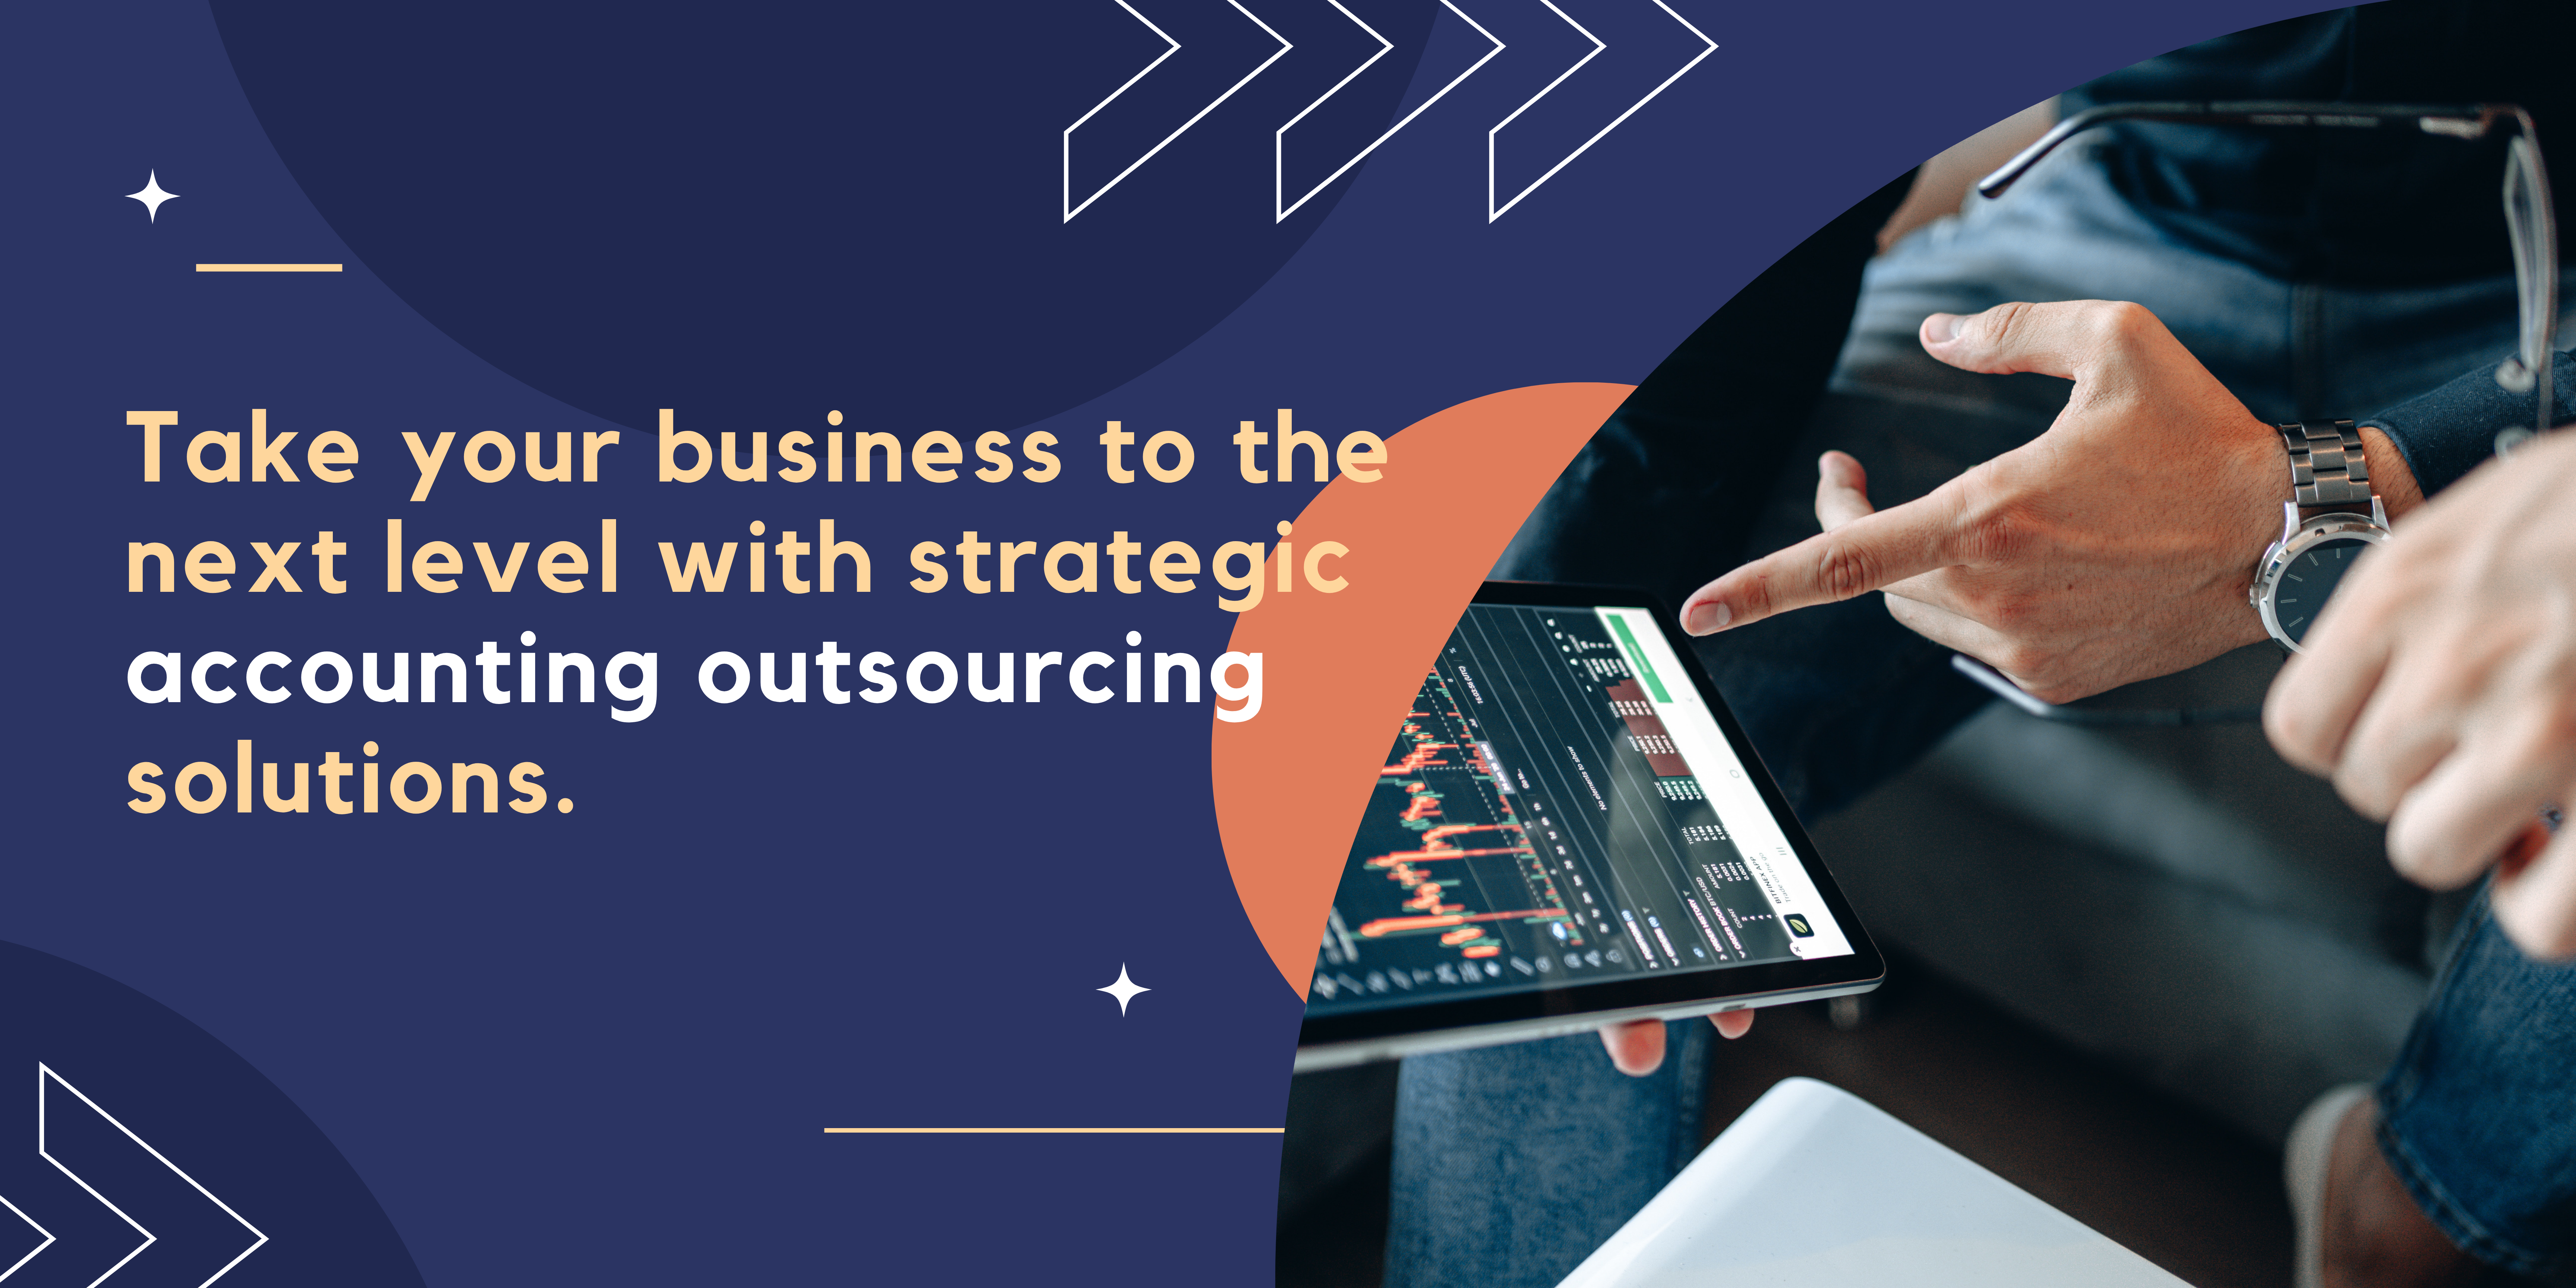 "Image: Business professionals collaborating on financial documents, symbolizing strategic accounting outsourcing solutions for business growth."